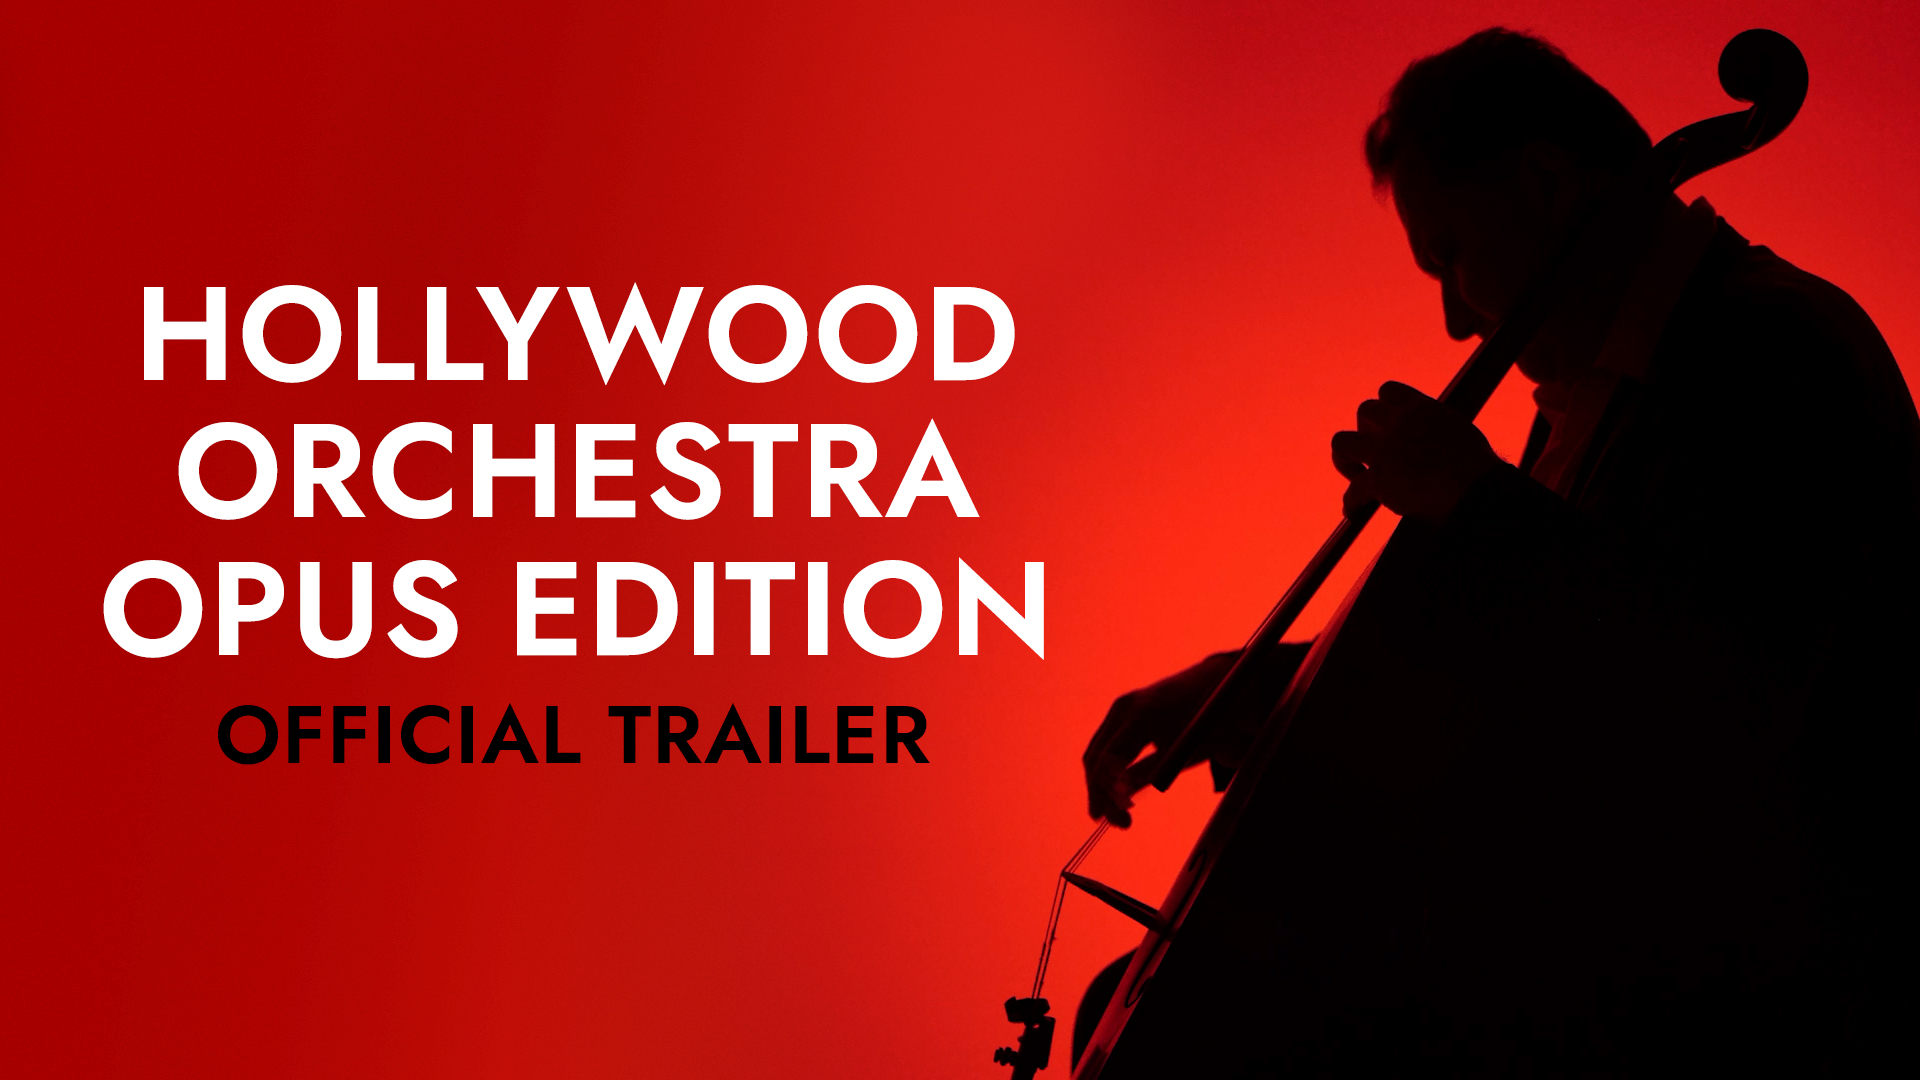 Watch the Hollywood Orchestra Opus Edition Trailer